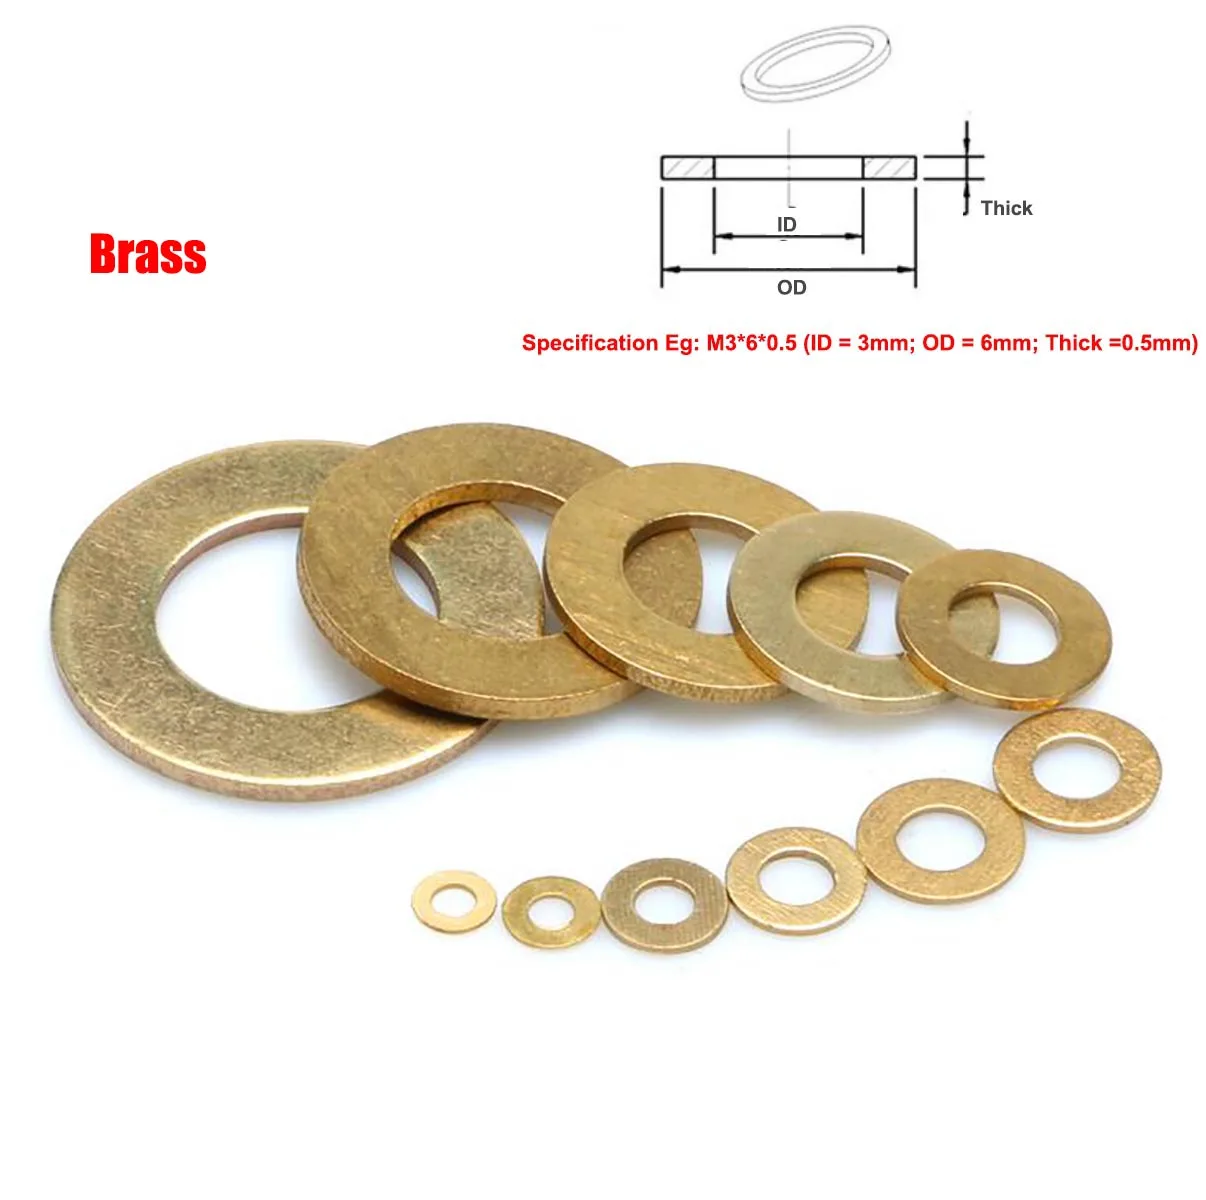 

Brass Flat Washers M2 M2.5 M3 M4 M5 M6 M8 M10 M12 M14 M16 M18 M20 DIN125 brass Plain Washer Gasket Rings Pad for Screw Bolts